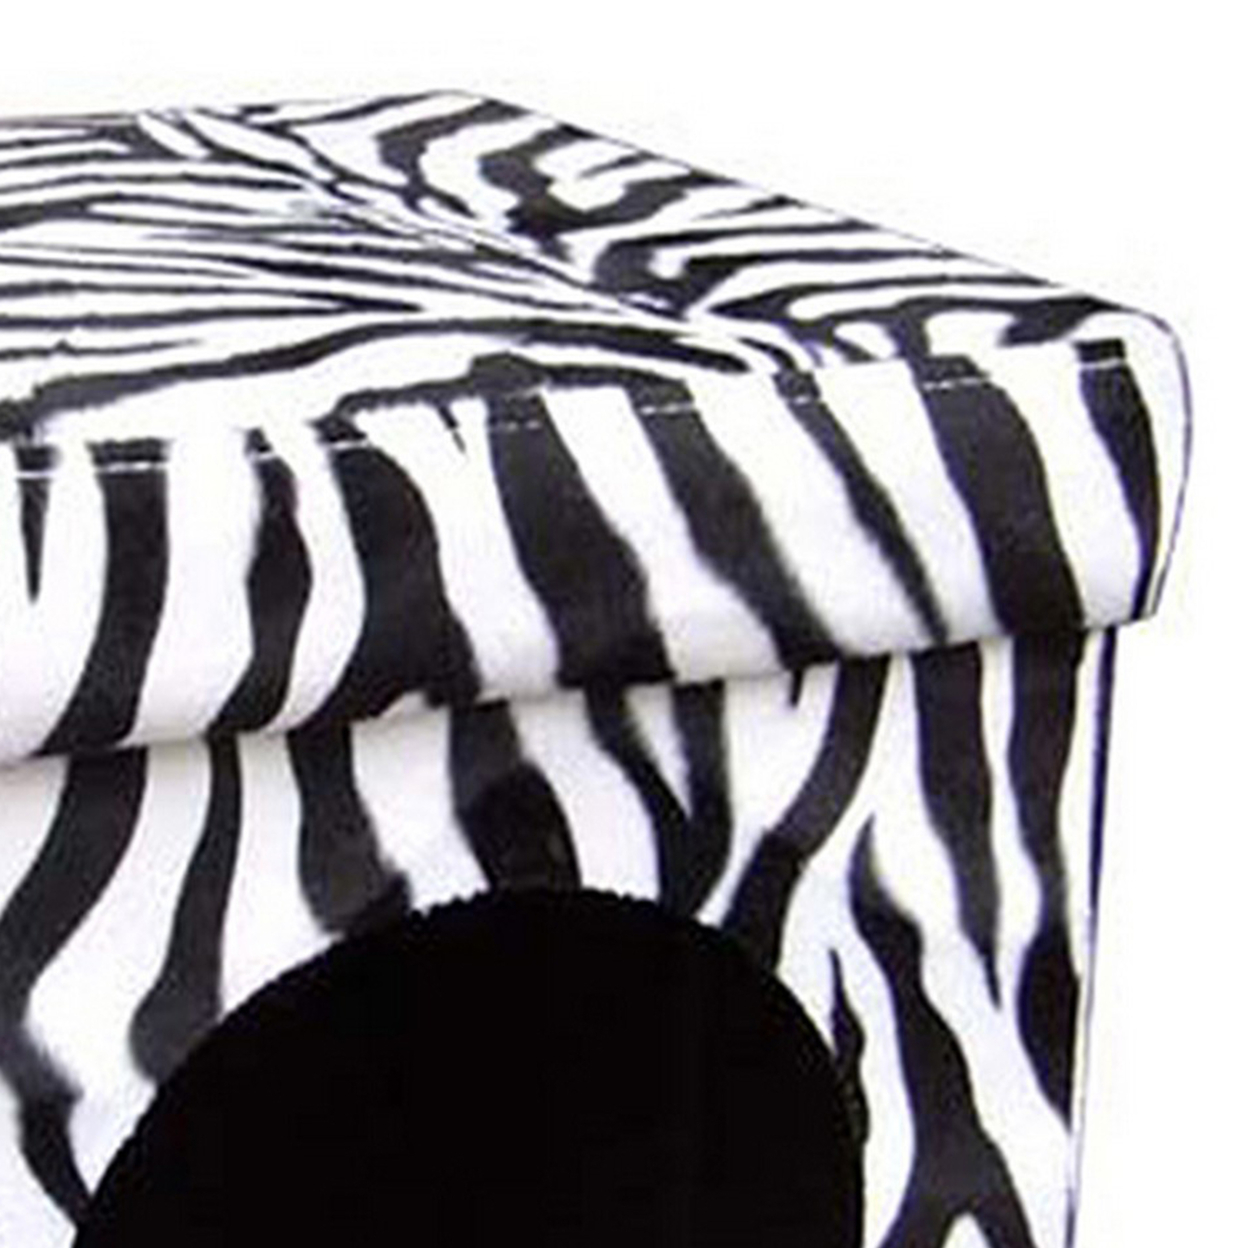 Pet House With Zebra Print Fabric And Removable Top, White And Black- Saltoro Sherpi